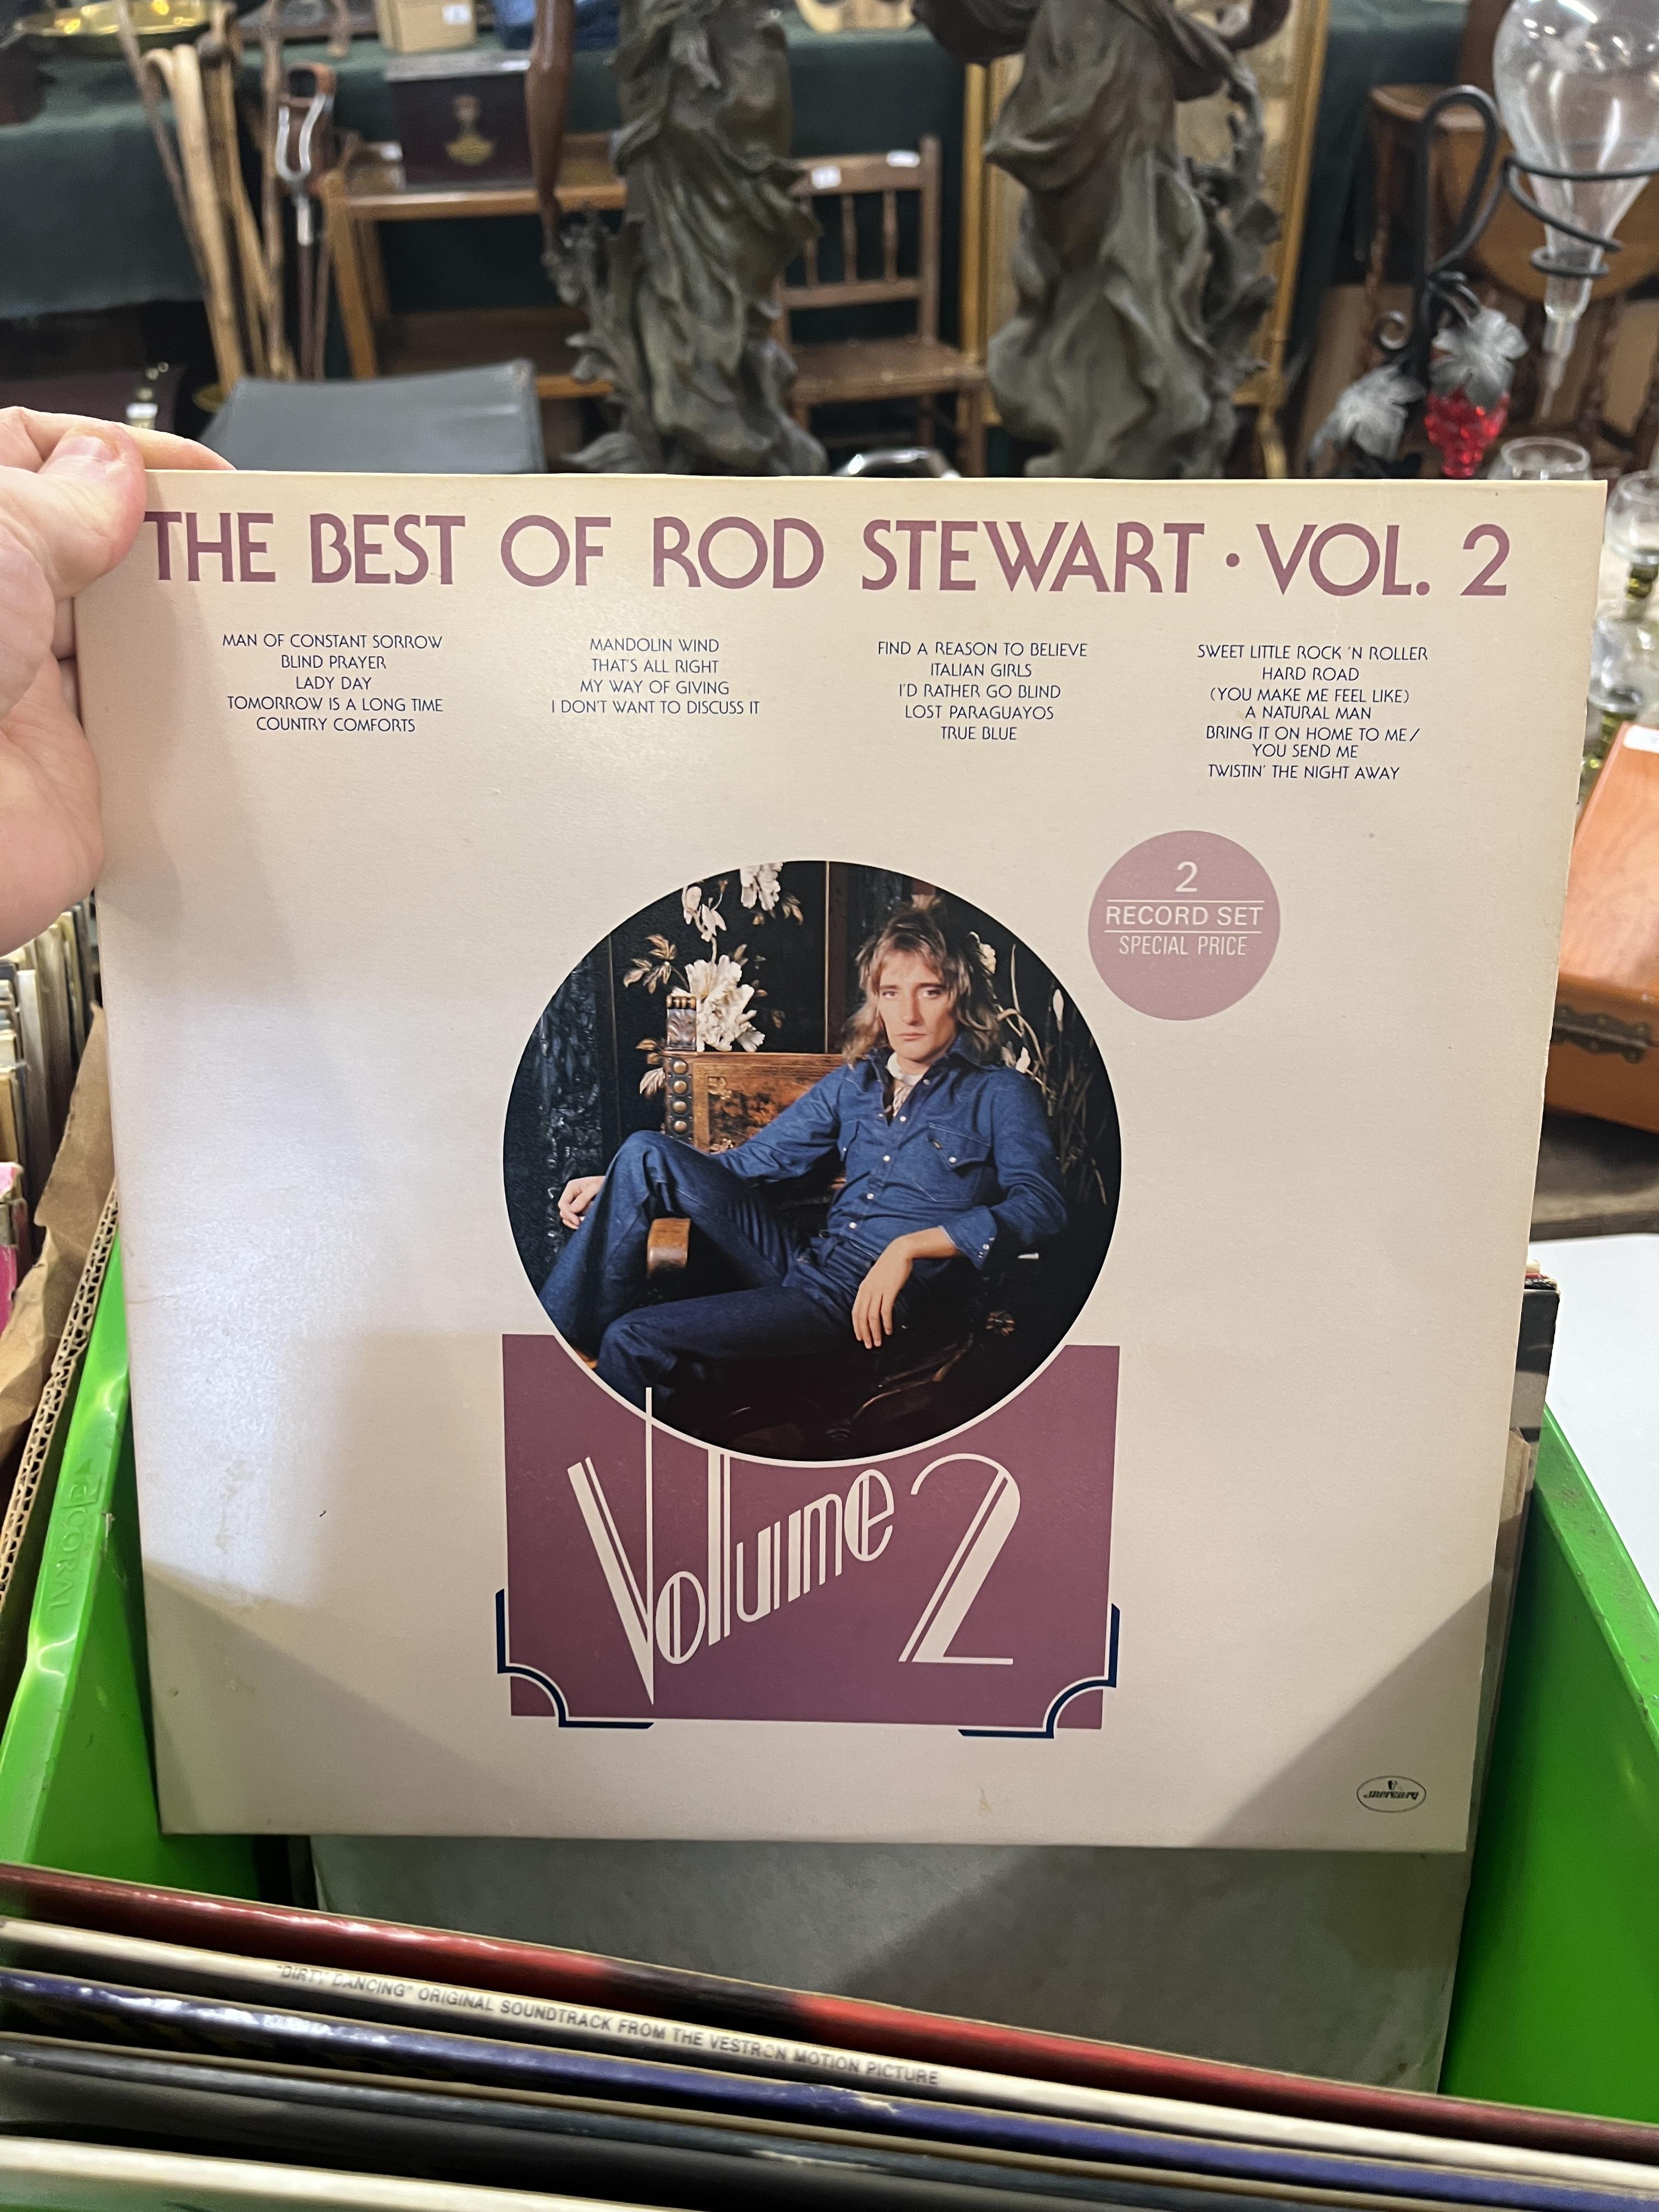 Collection of LPs to include Fleetwood Mac, Rod Stewart, etc. - Image 6 of 44